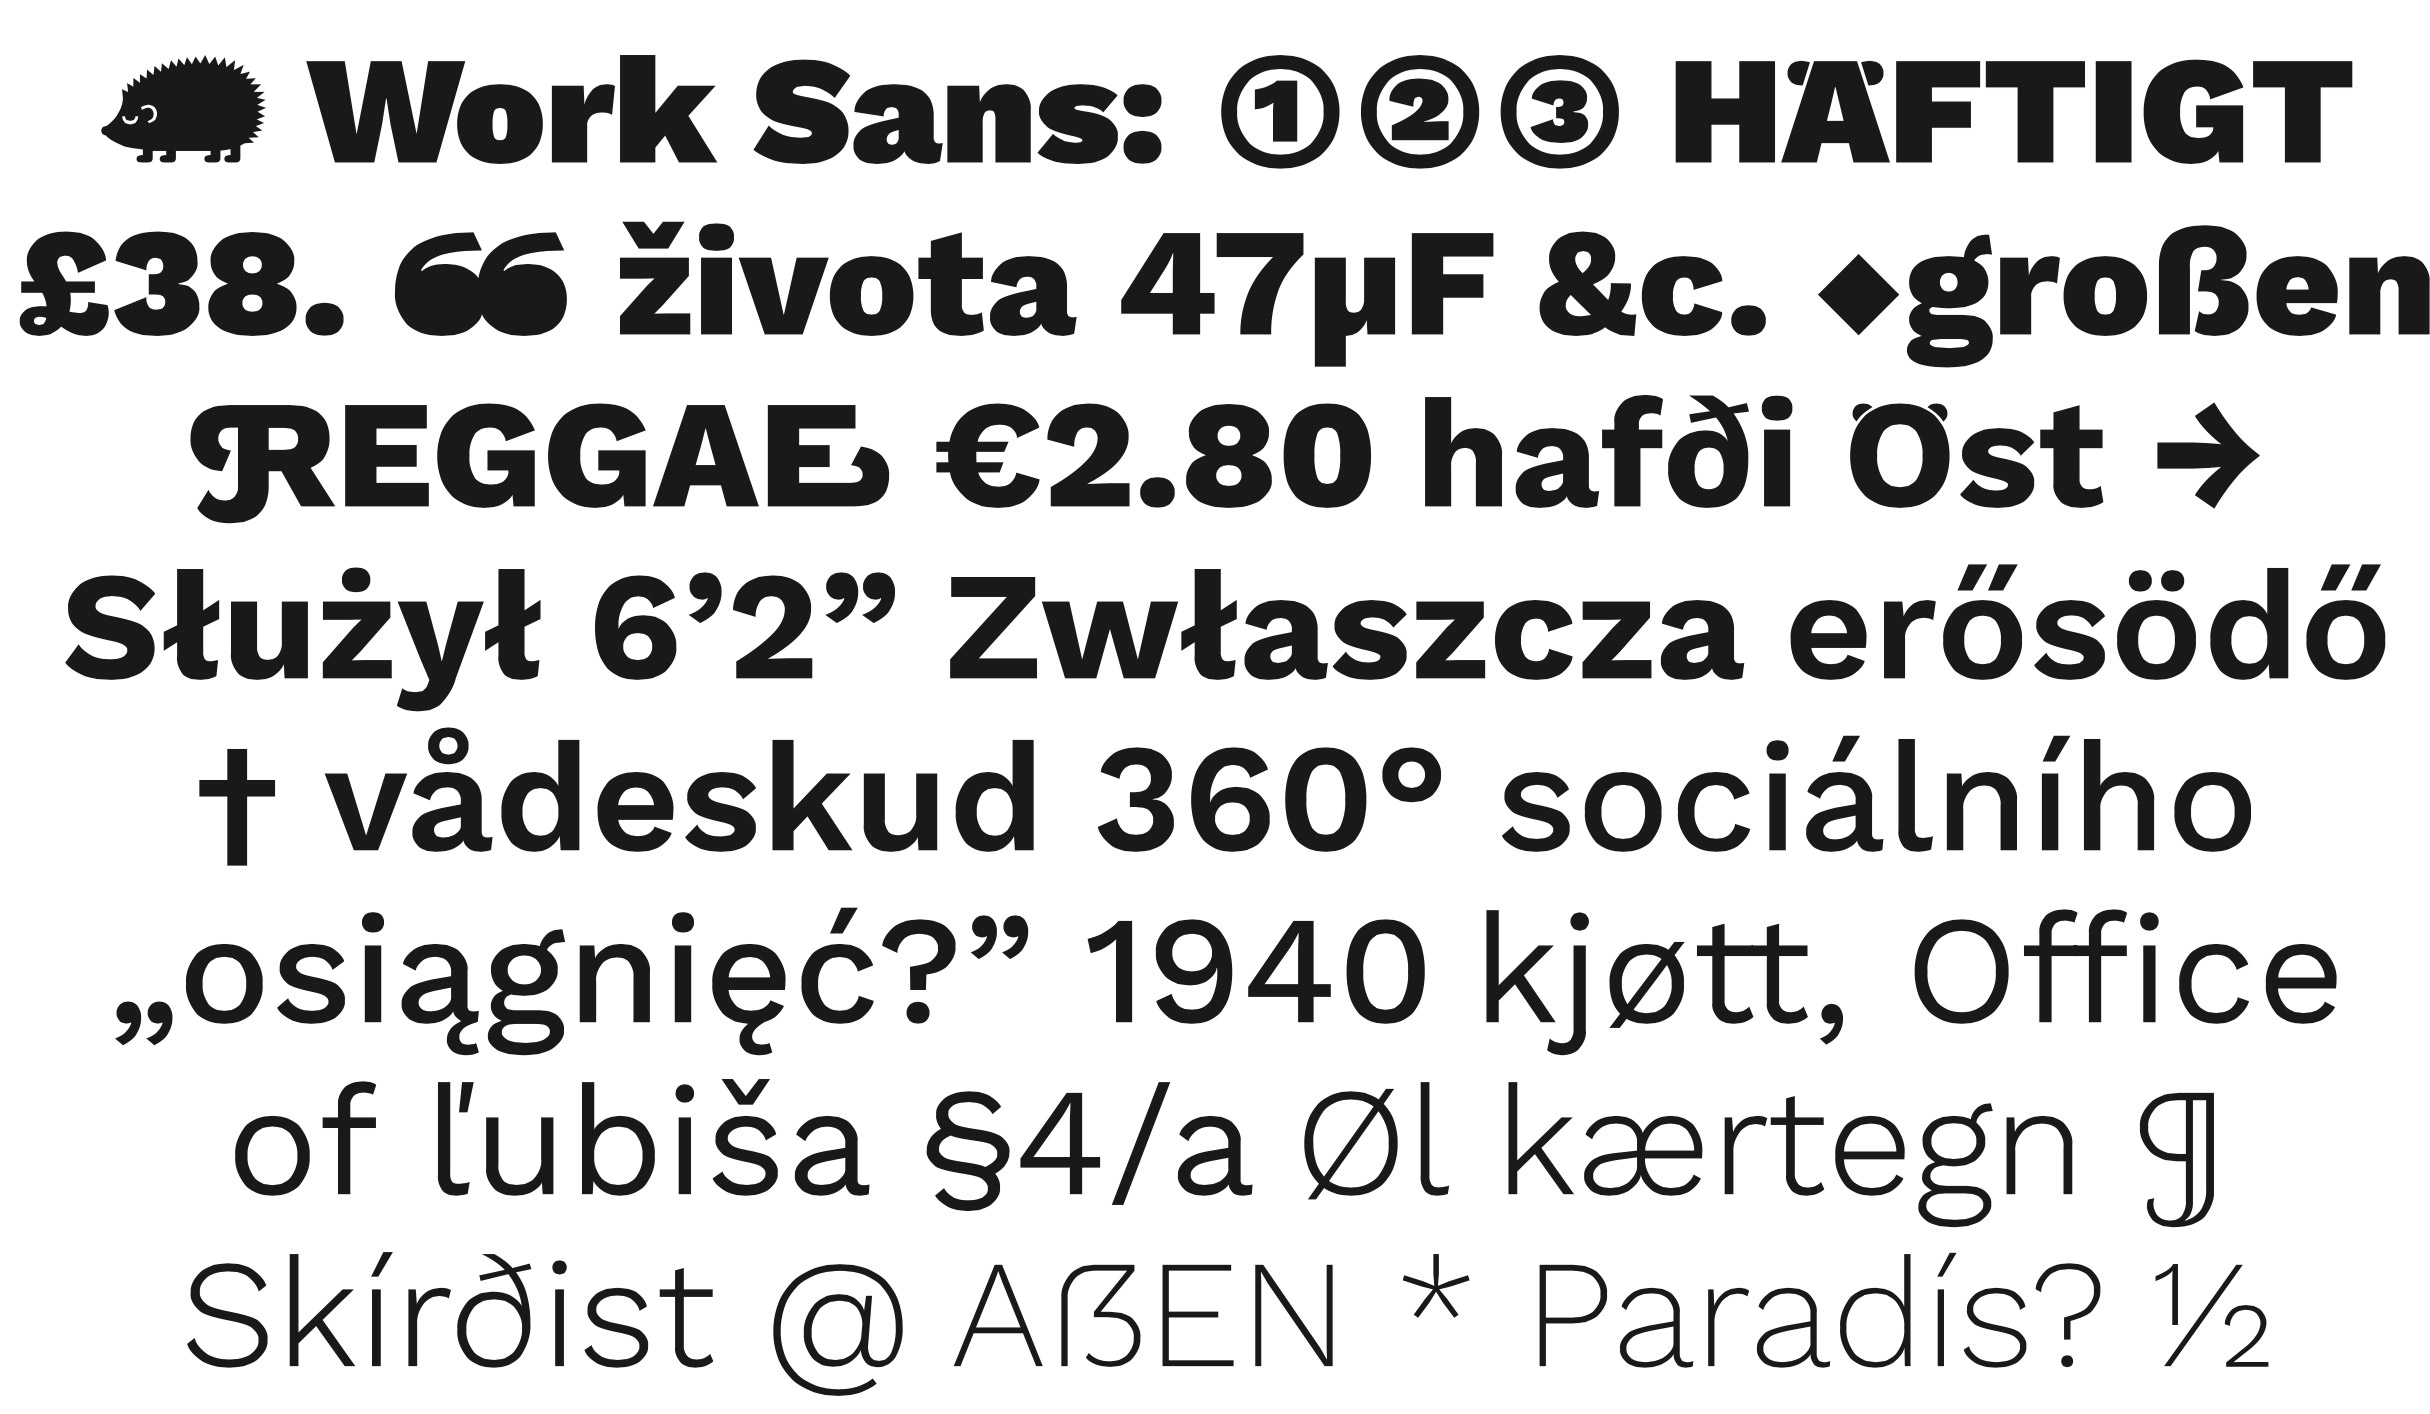 Work-Sans: Formal and Multi-weight Typeface